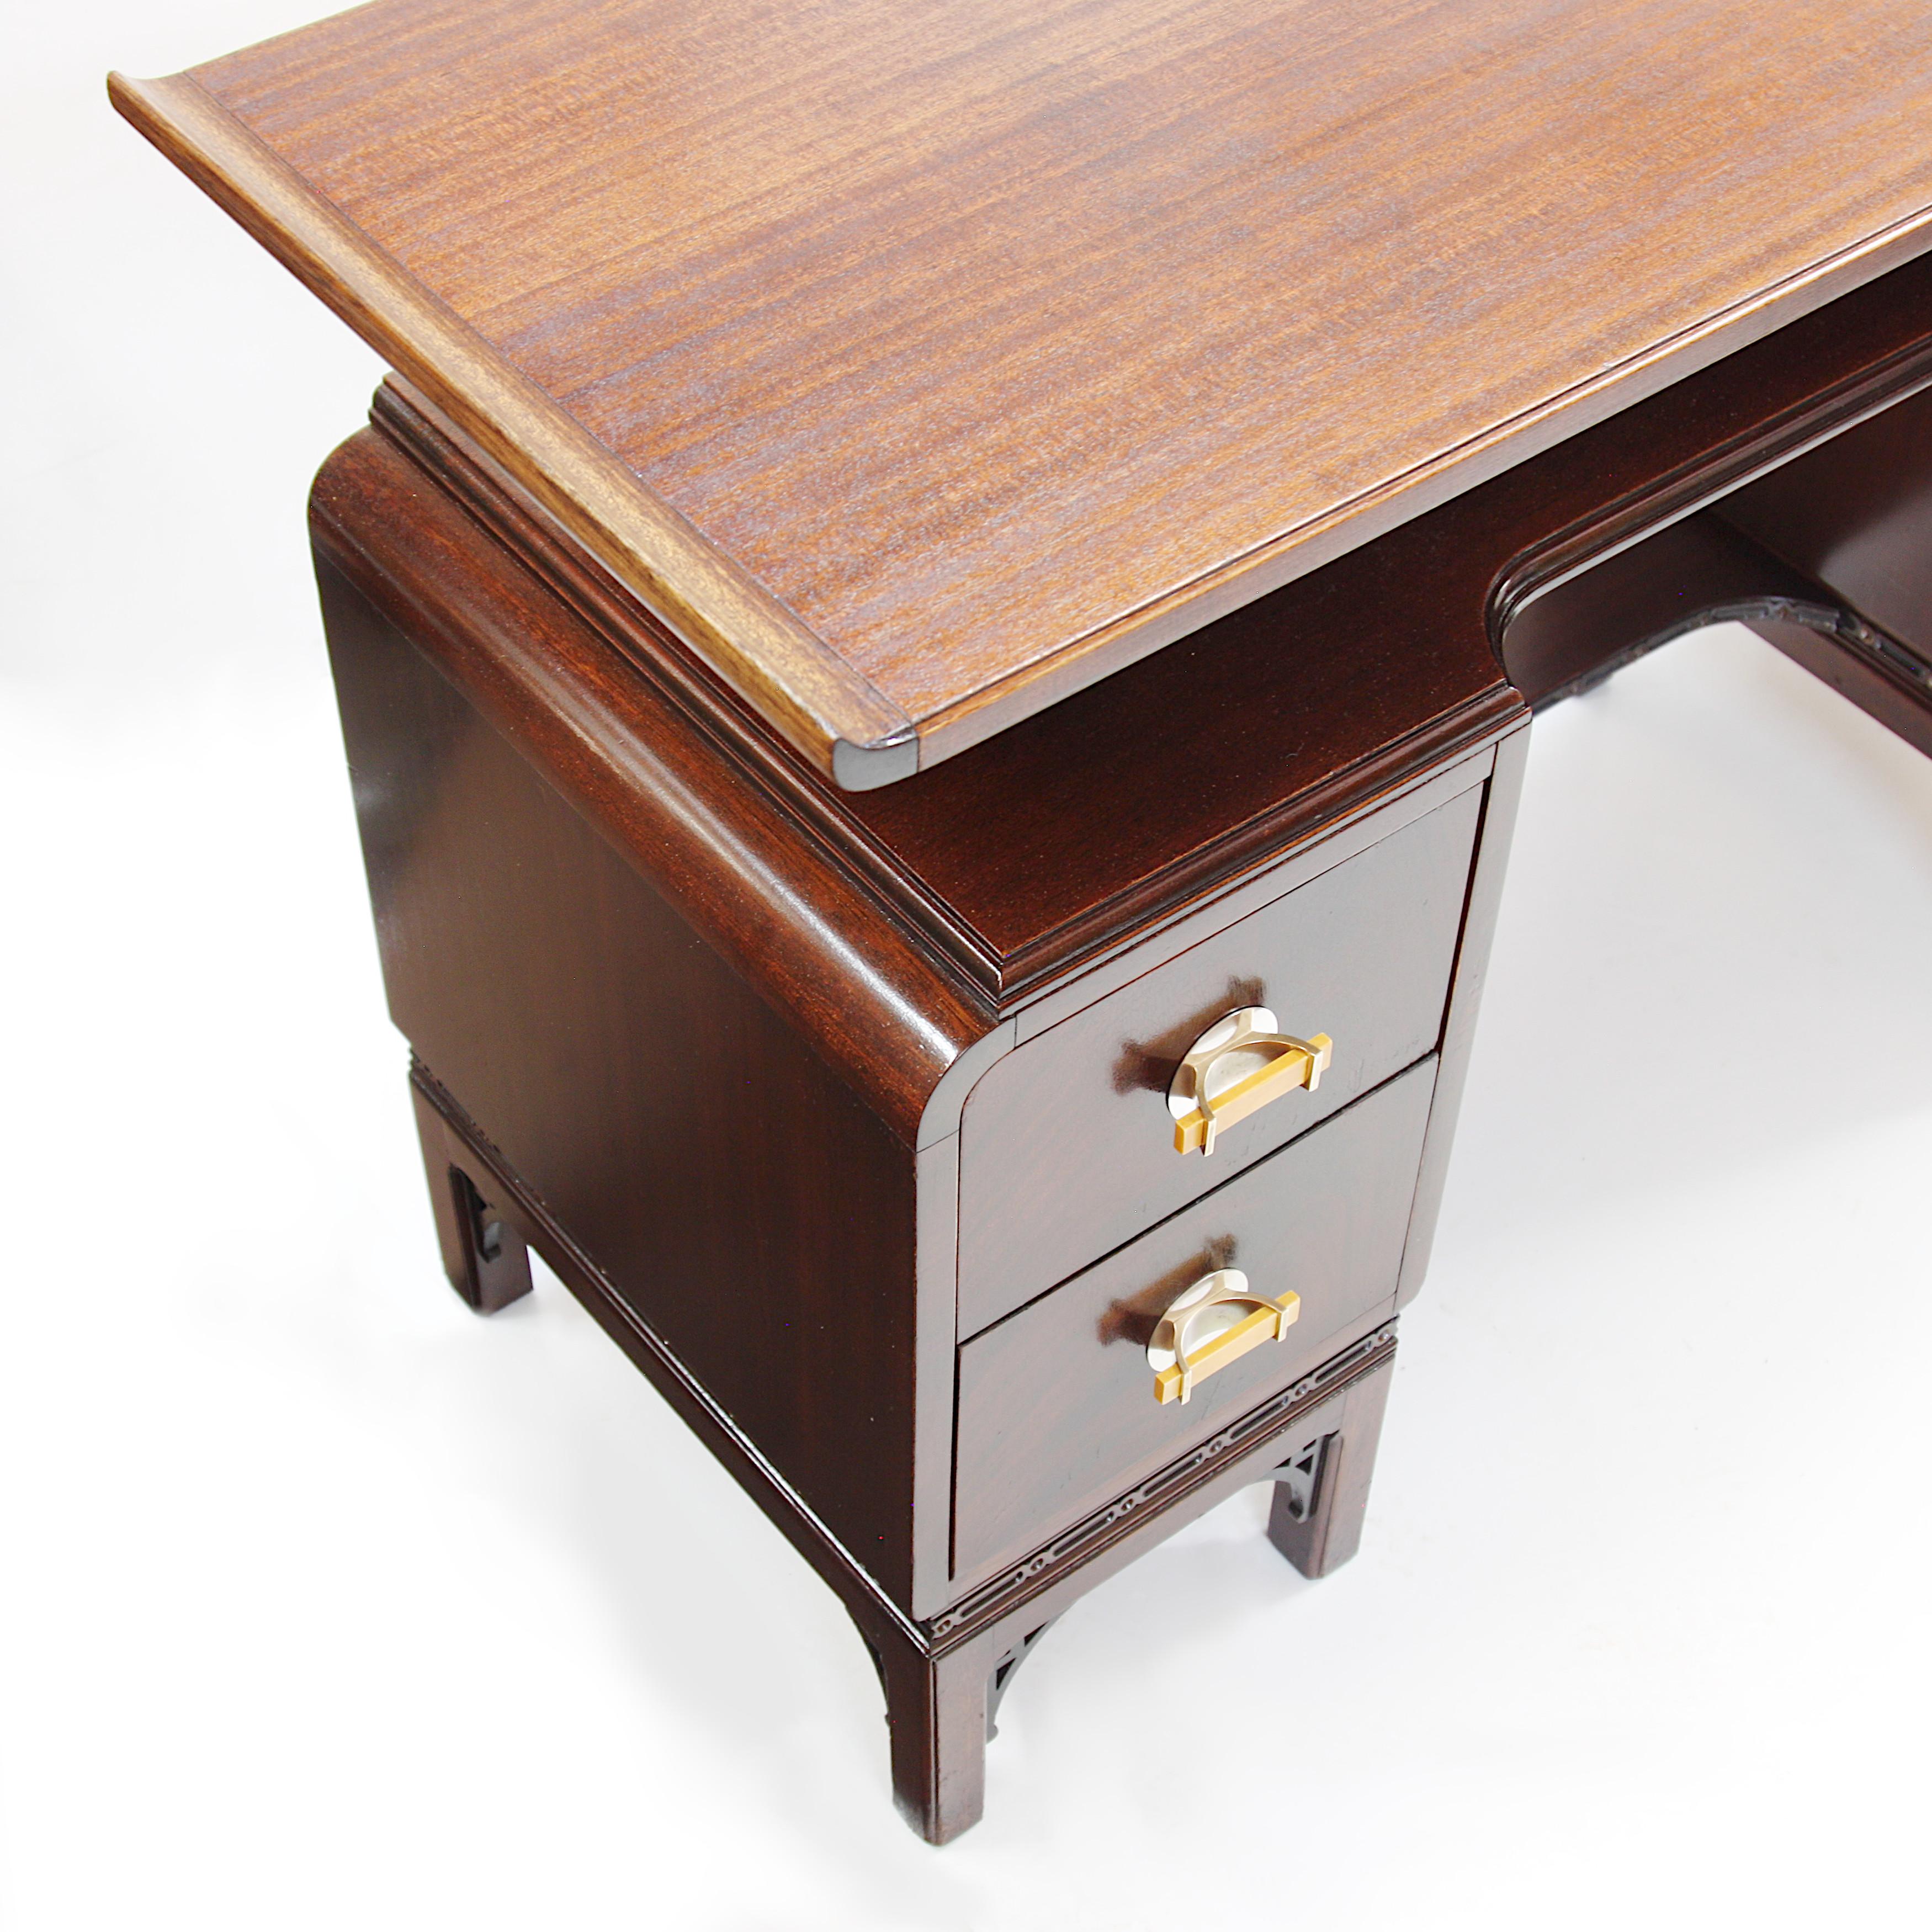 Mid-Century Modern Asian-Influenced Pagoda Desk by The Northern Furniture Co. For Sale 2